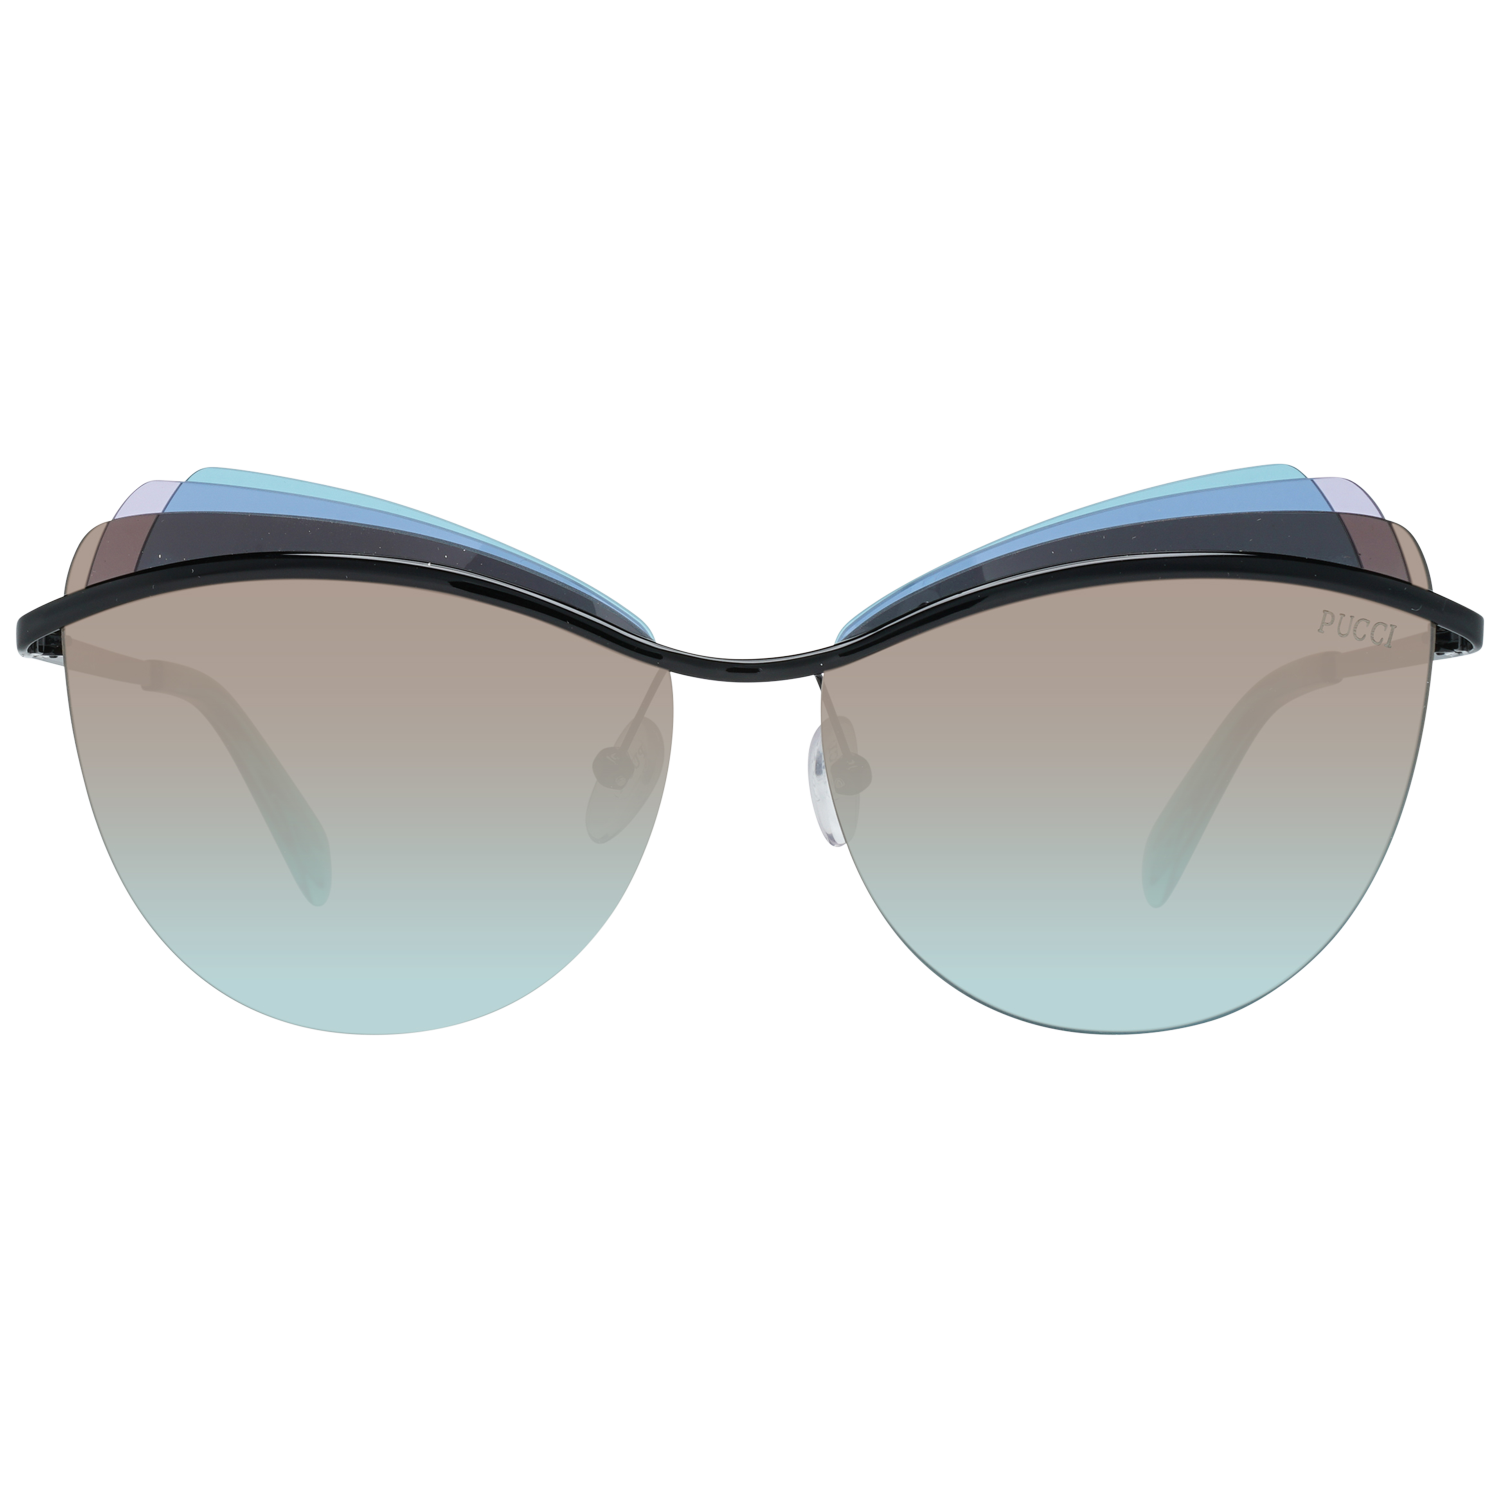 Emilio Pucci Sunglasses EP0112 01F 59 Women
Frame color: Green
Lenses color: Green
Lenses material: Plastic
Filter category: 2
Style: Cat Eye
Lenses effect: Gradient
Protection: 100% UVA & UVB
Size: 59-14-140
Lenses width: 59
Lenses height: 46
Bridge width: 14
Frame width: 140
Temples length: 140
Shipment includes: Case, cleaning cloth
Spring hinge: No